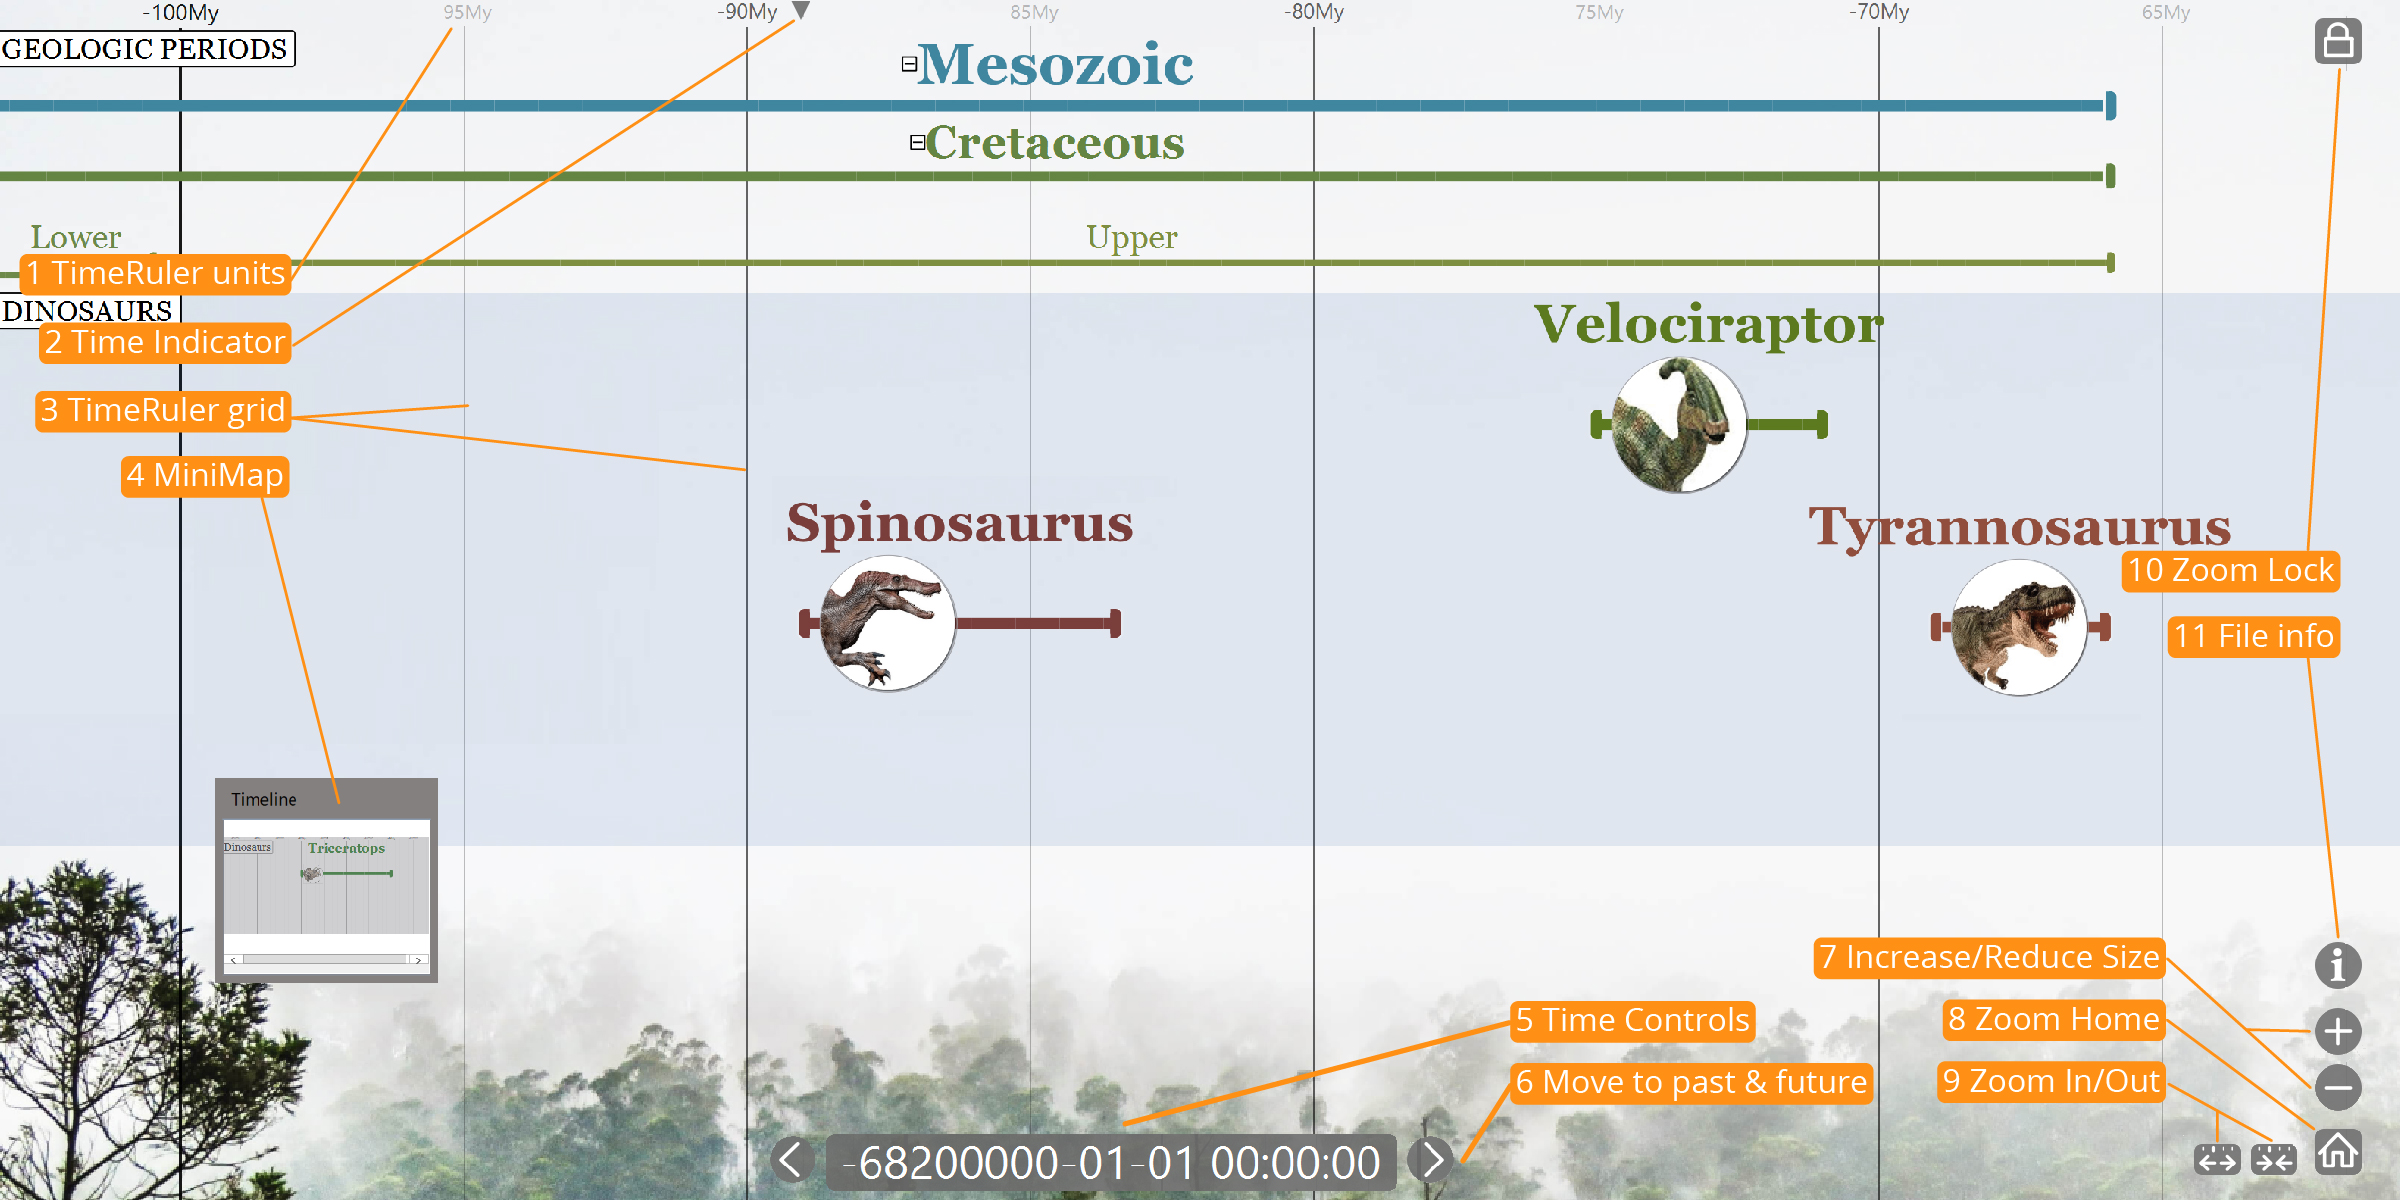 Timeline of the Dinosaurs including the Geological Time Scale periods they lived in